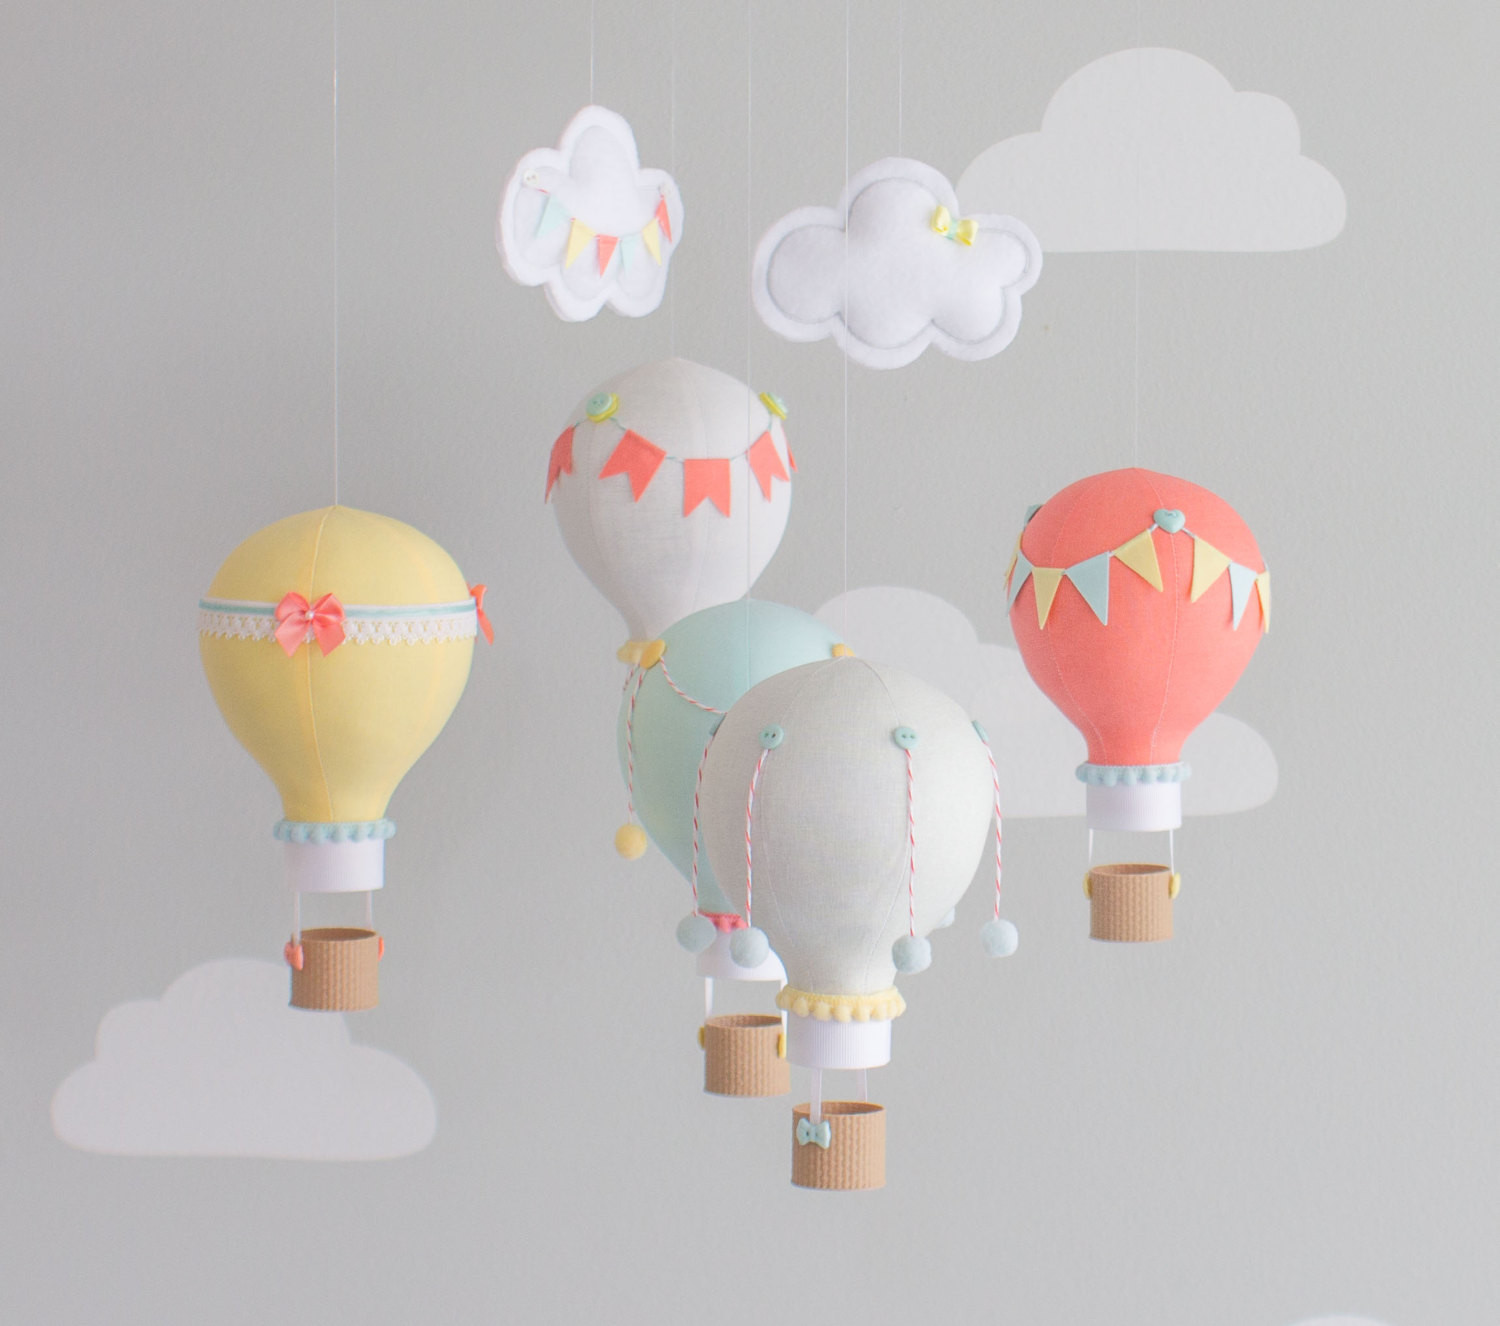 The 20 Best Ideas for Hot Air Balloon Baby Decor - Home, Family, Style ...